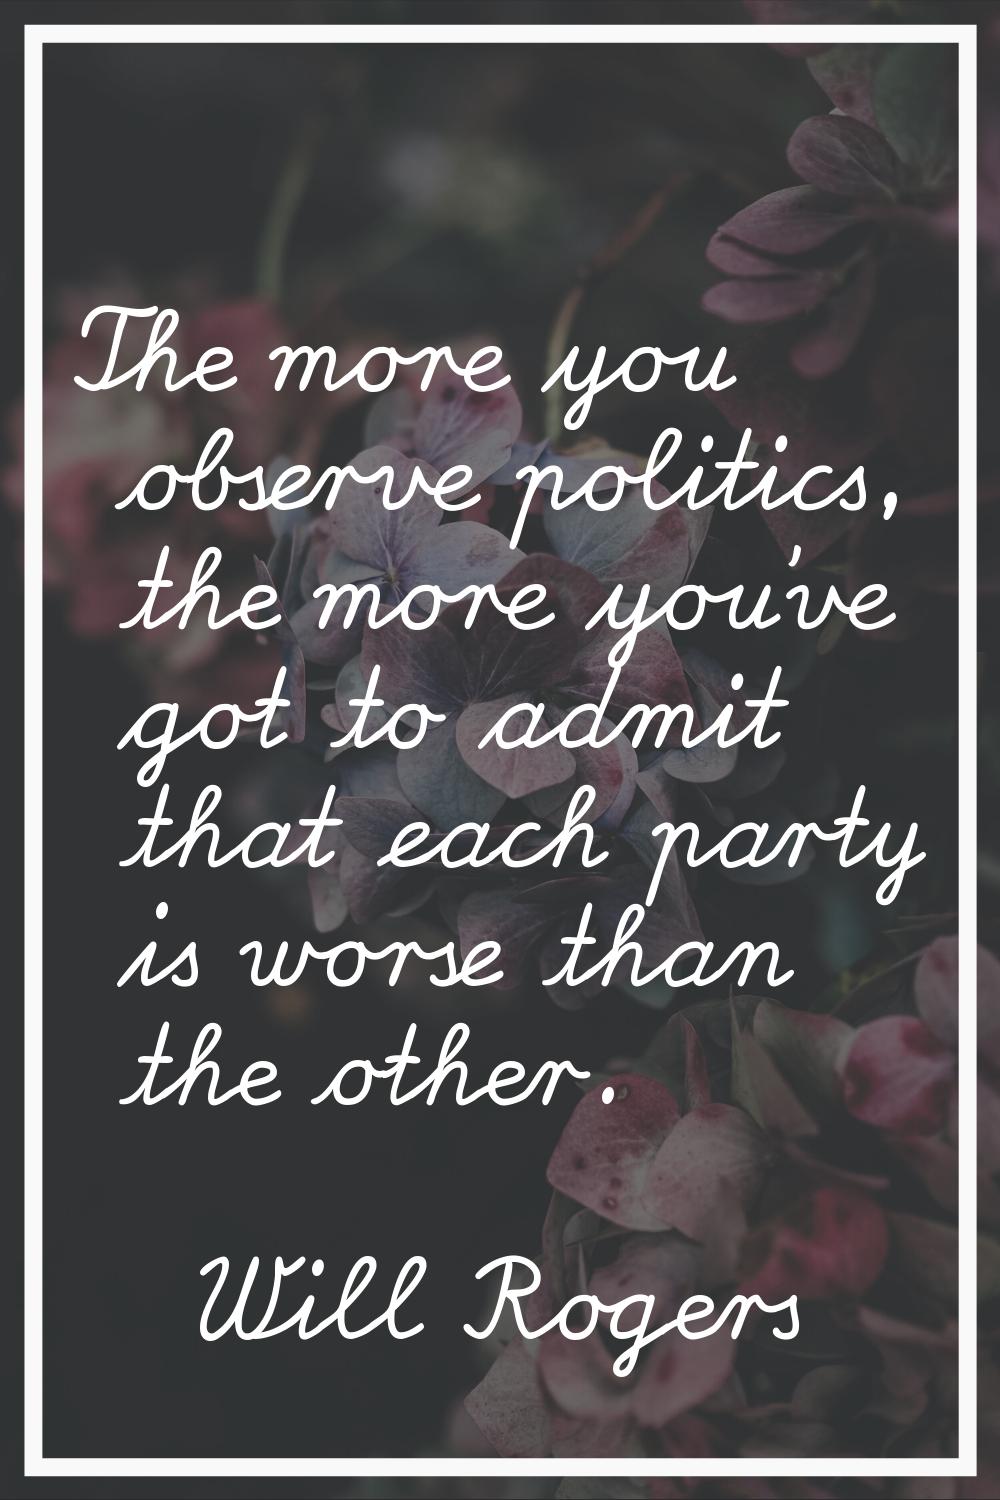 The more you observe politics, the more you've got to admit that each party is worse than the other